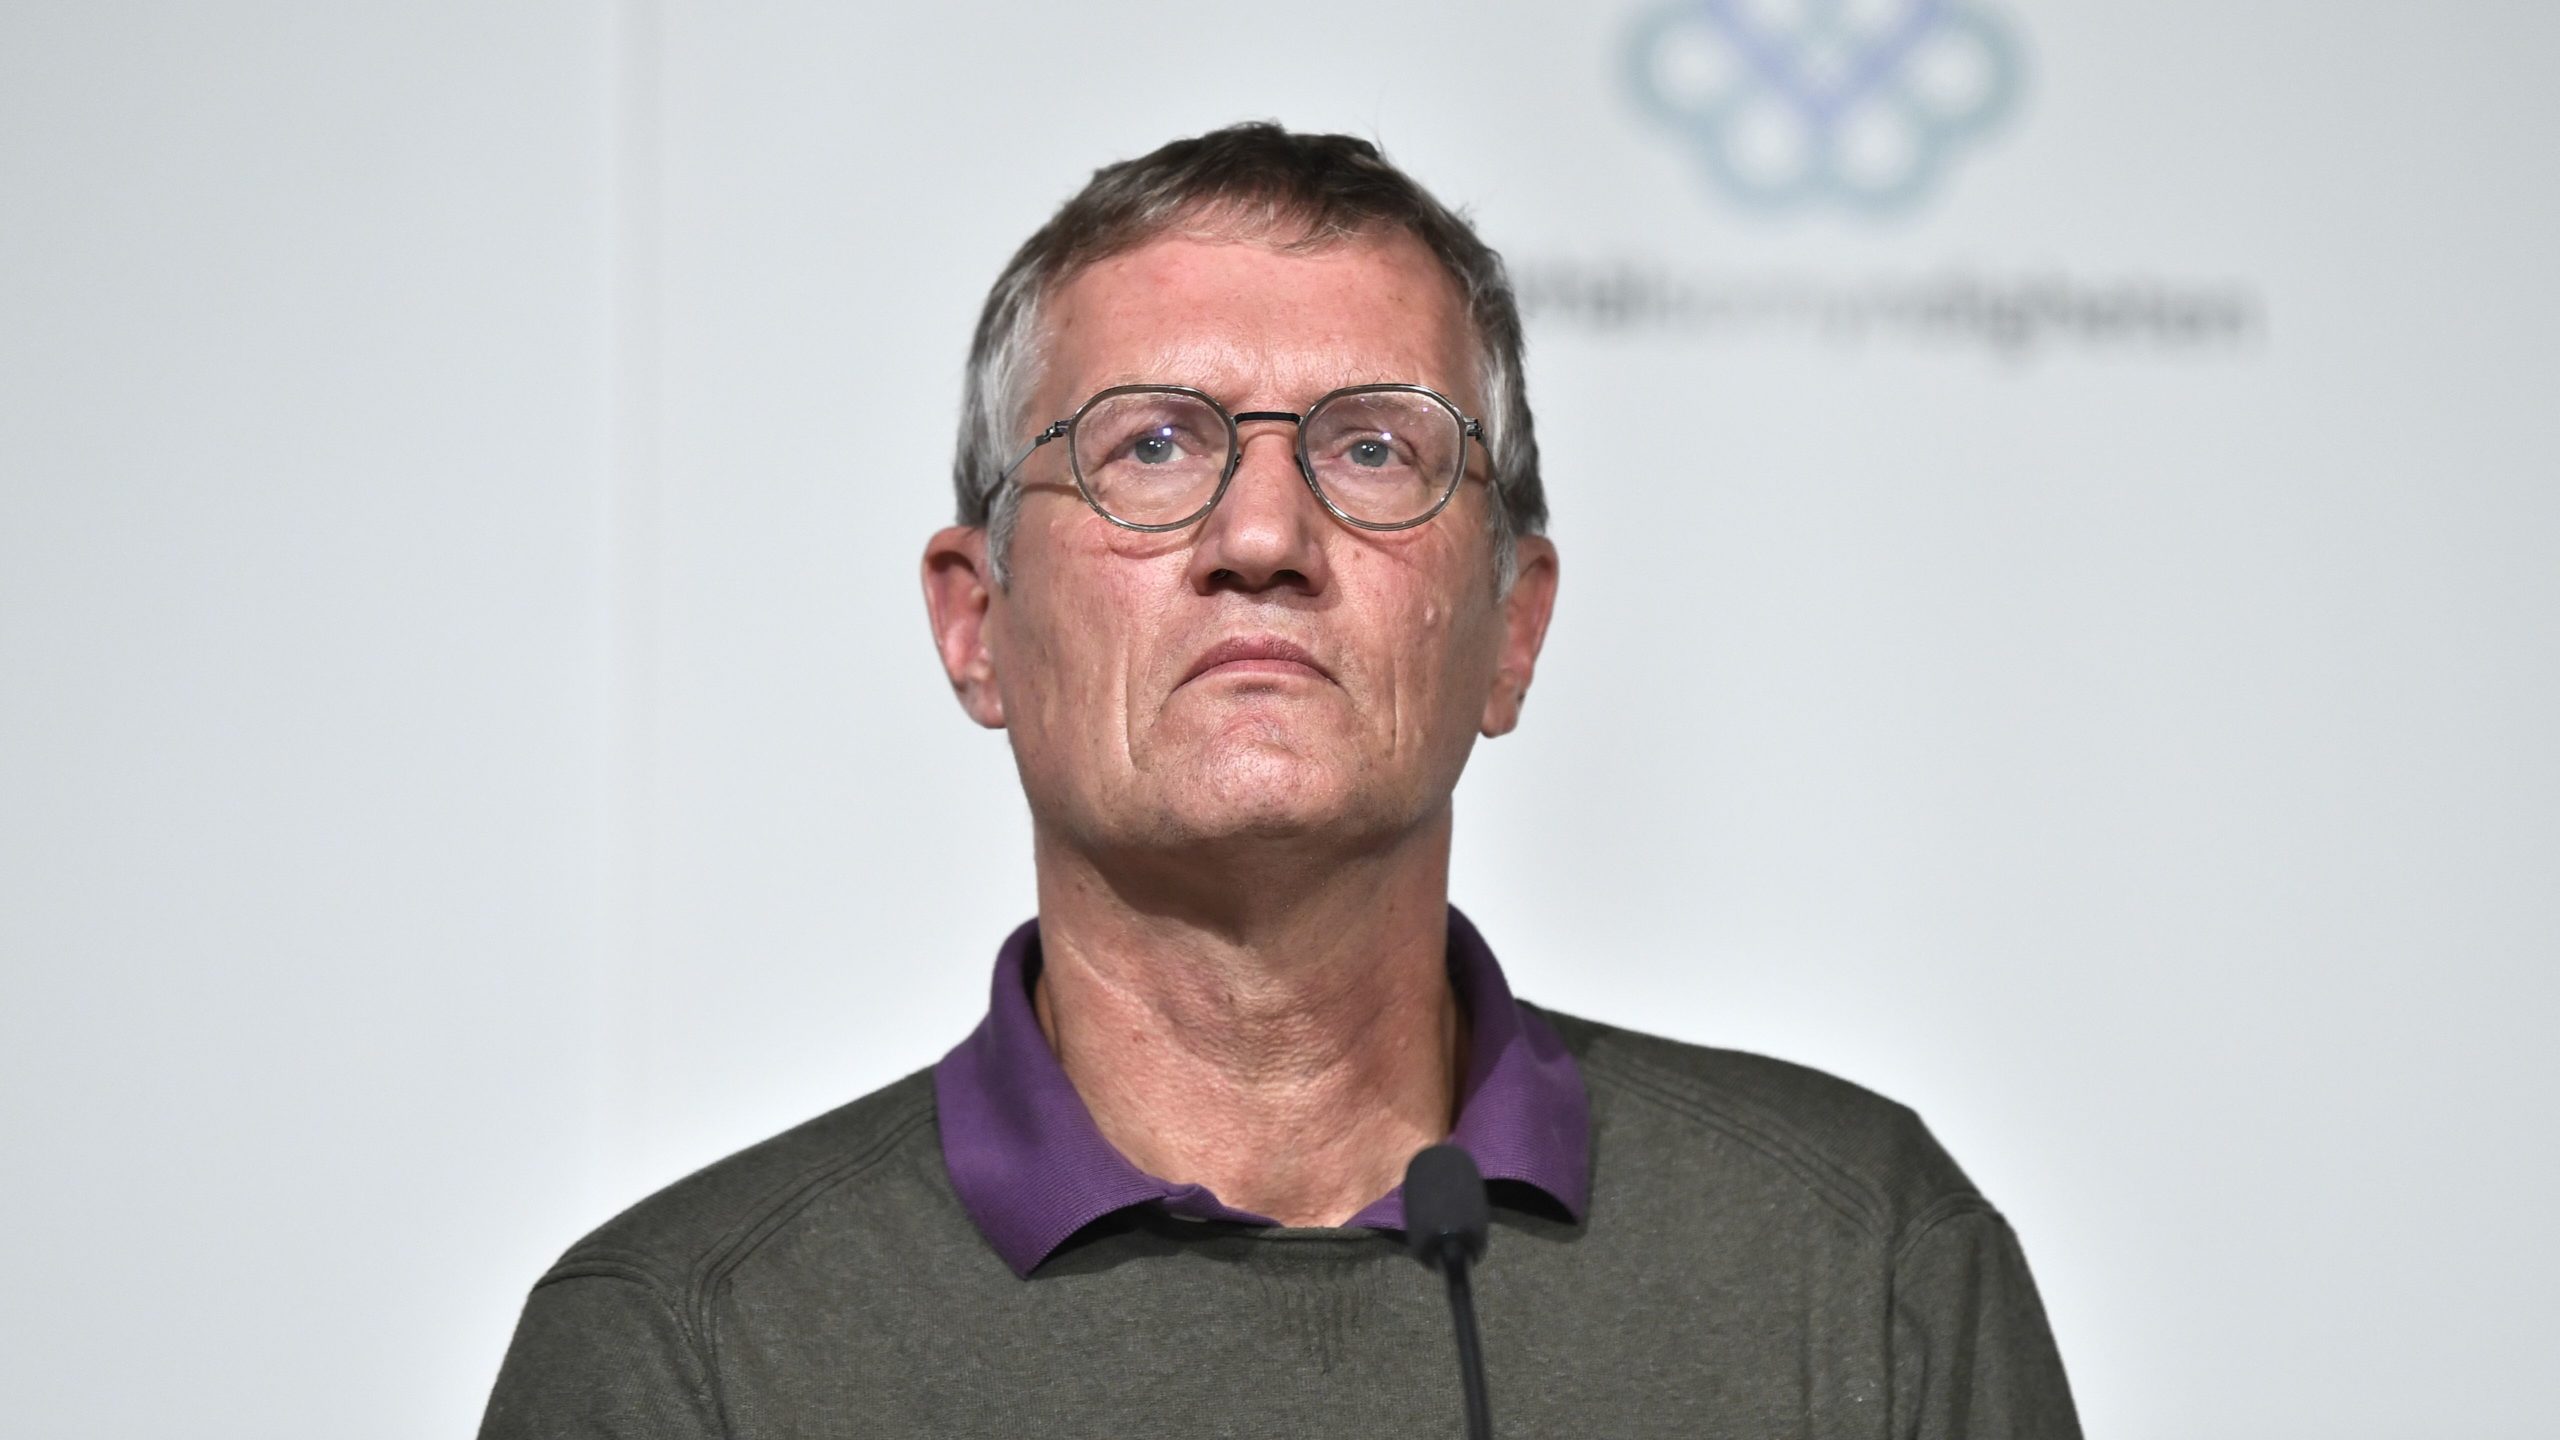 State epidemiologist Anders Tegnell of the Swedish Public Health Agency holds a press conference updating on the coronavirus pandemic (Covid-19) situation, in Stockholm on October 6, 2020 (CLAUDIO BRESCIANI/TT News Agency/AFP via Getty Images)